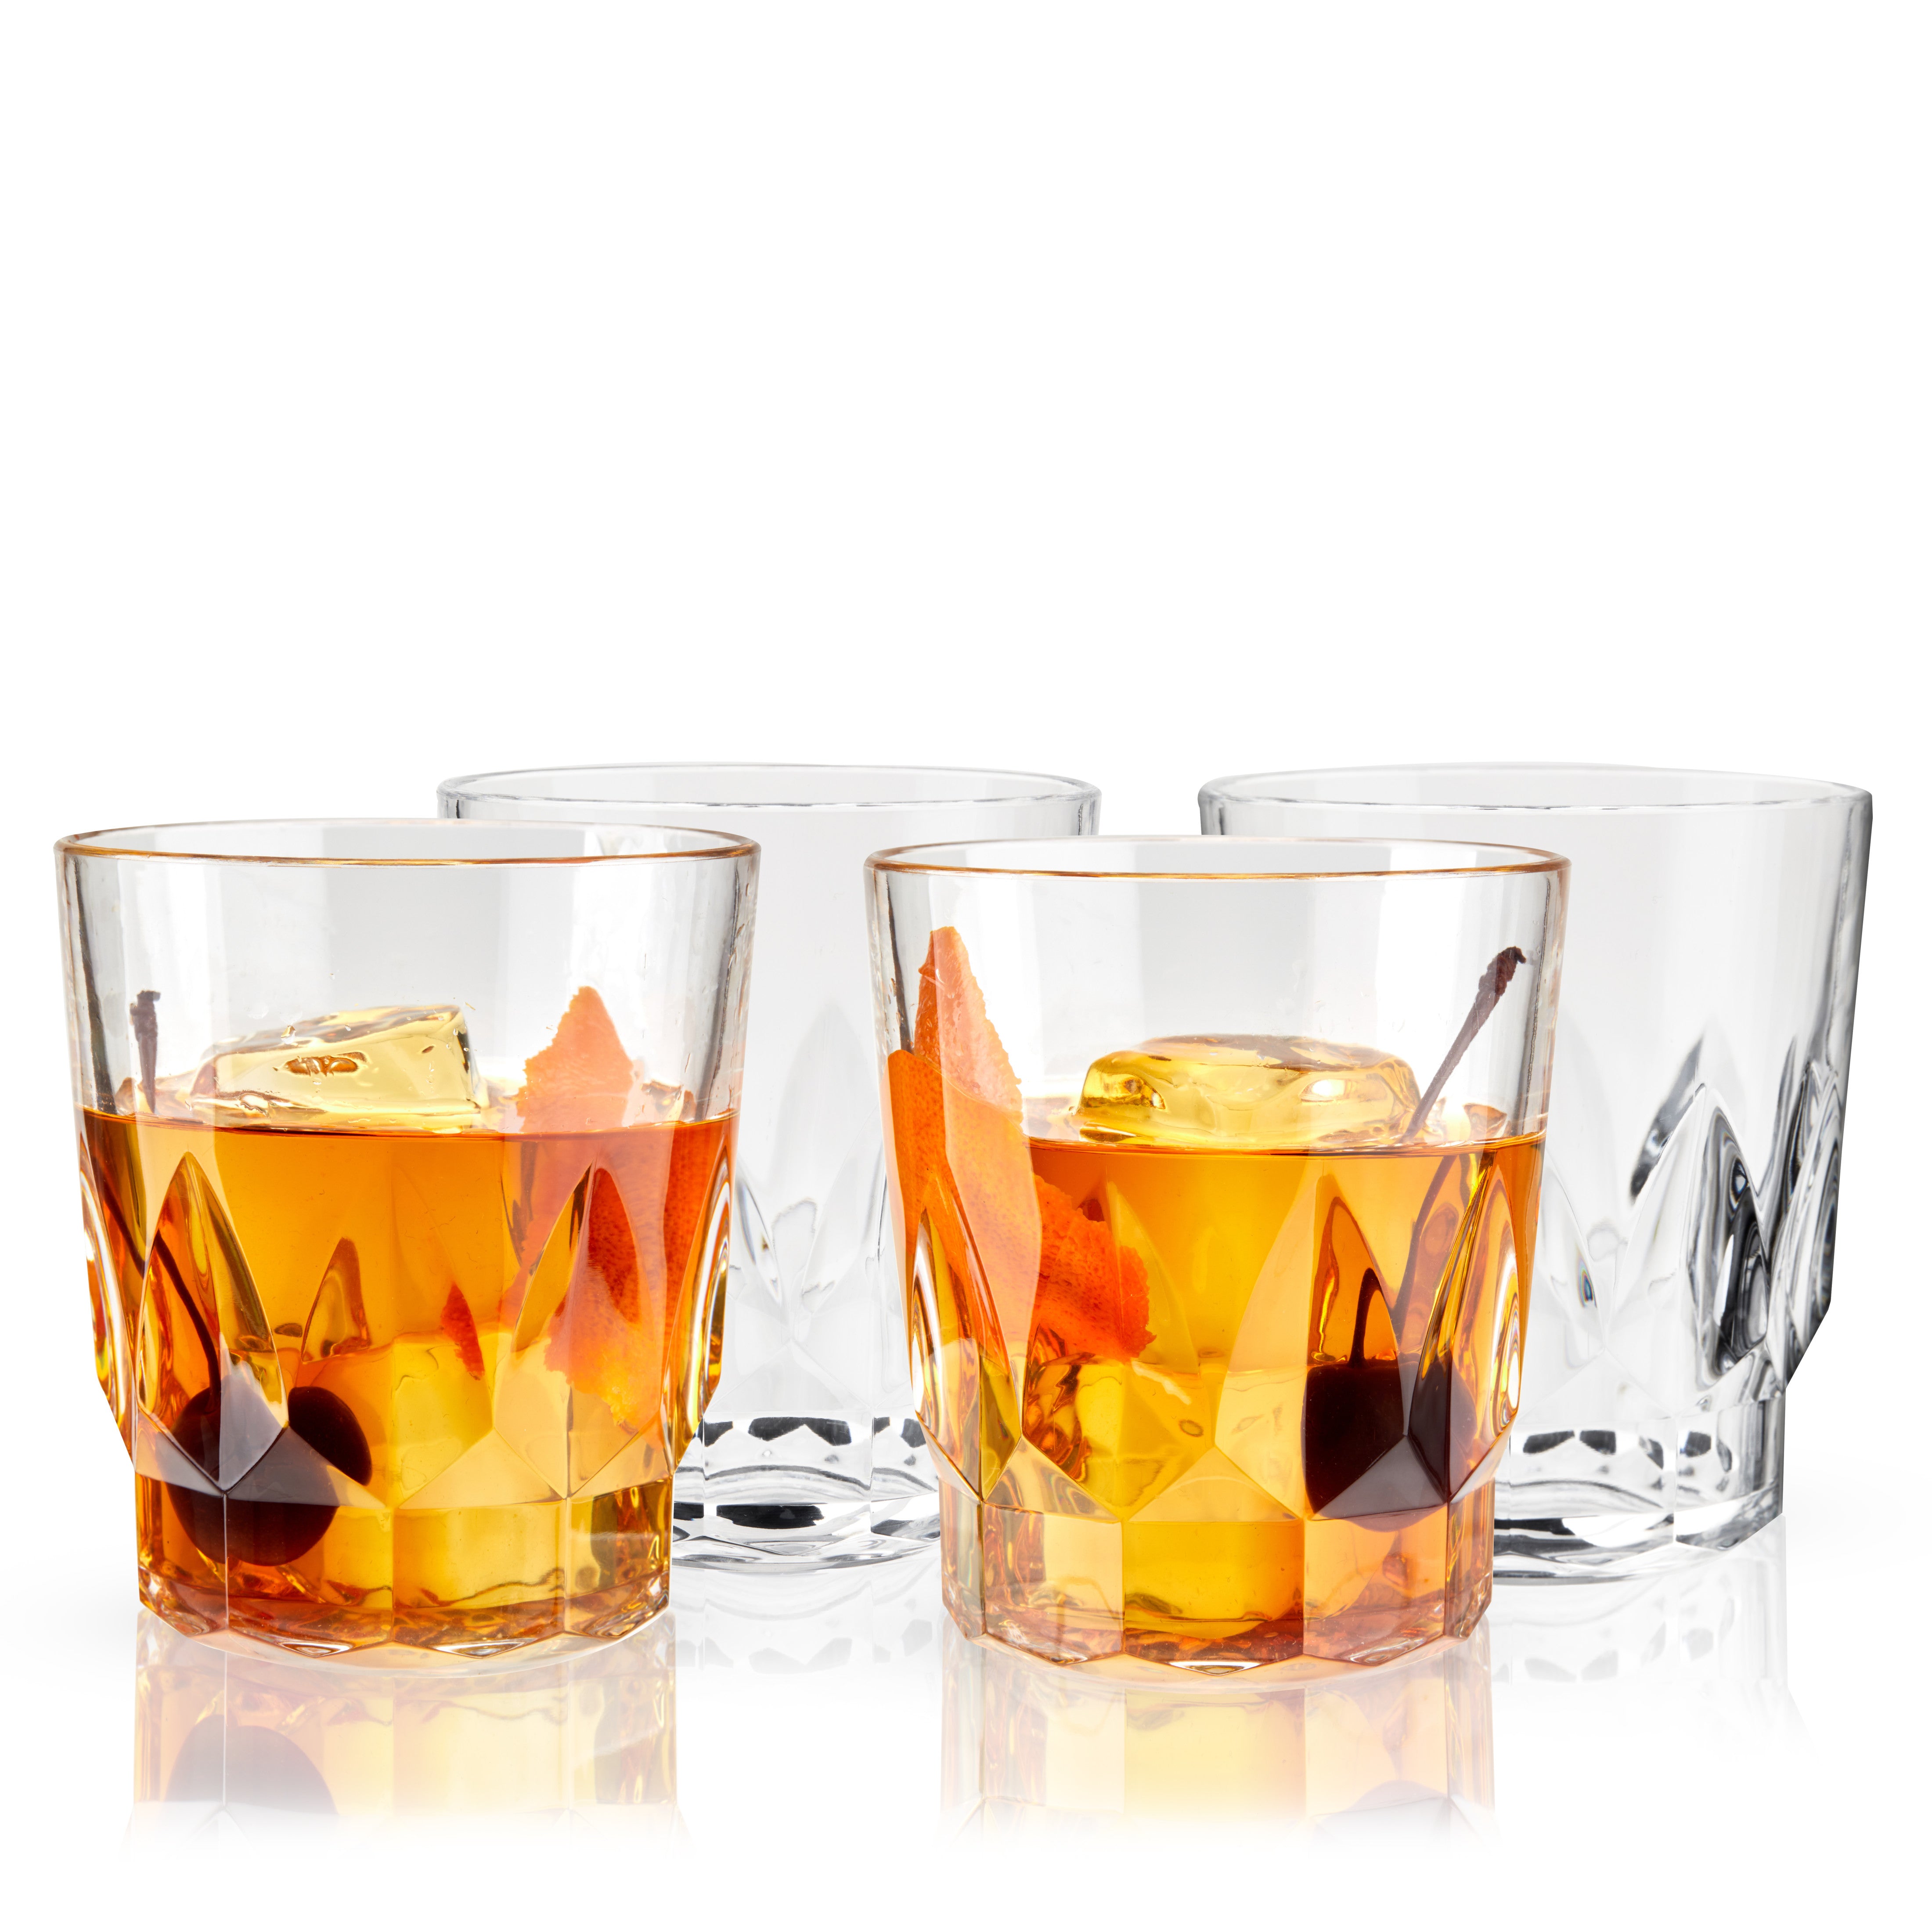 Old Fashioned Whiskey Glasses with Luxury Box - 10 Oz Rocks Barware For  Scotch, Bourbon, Liquor and